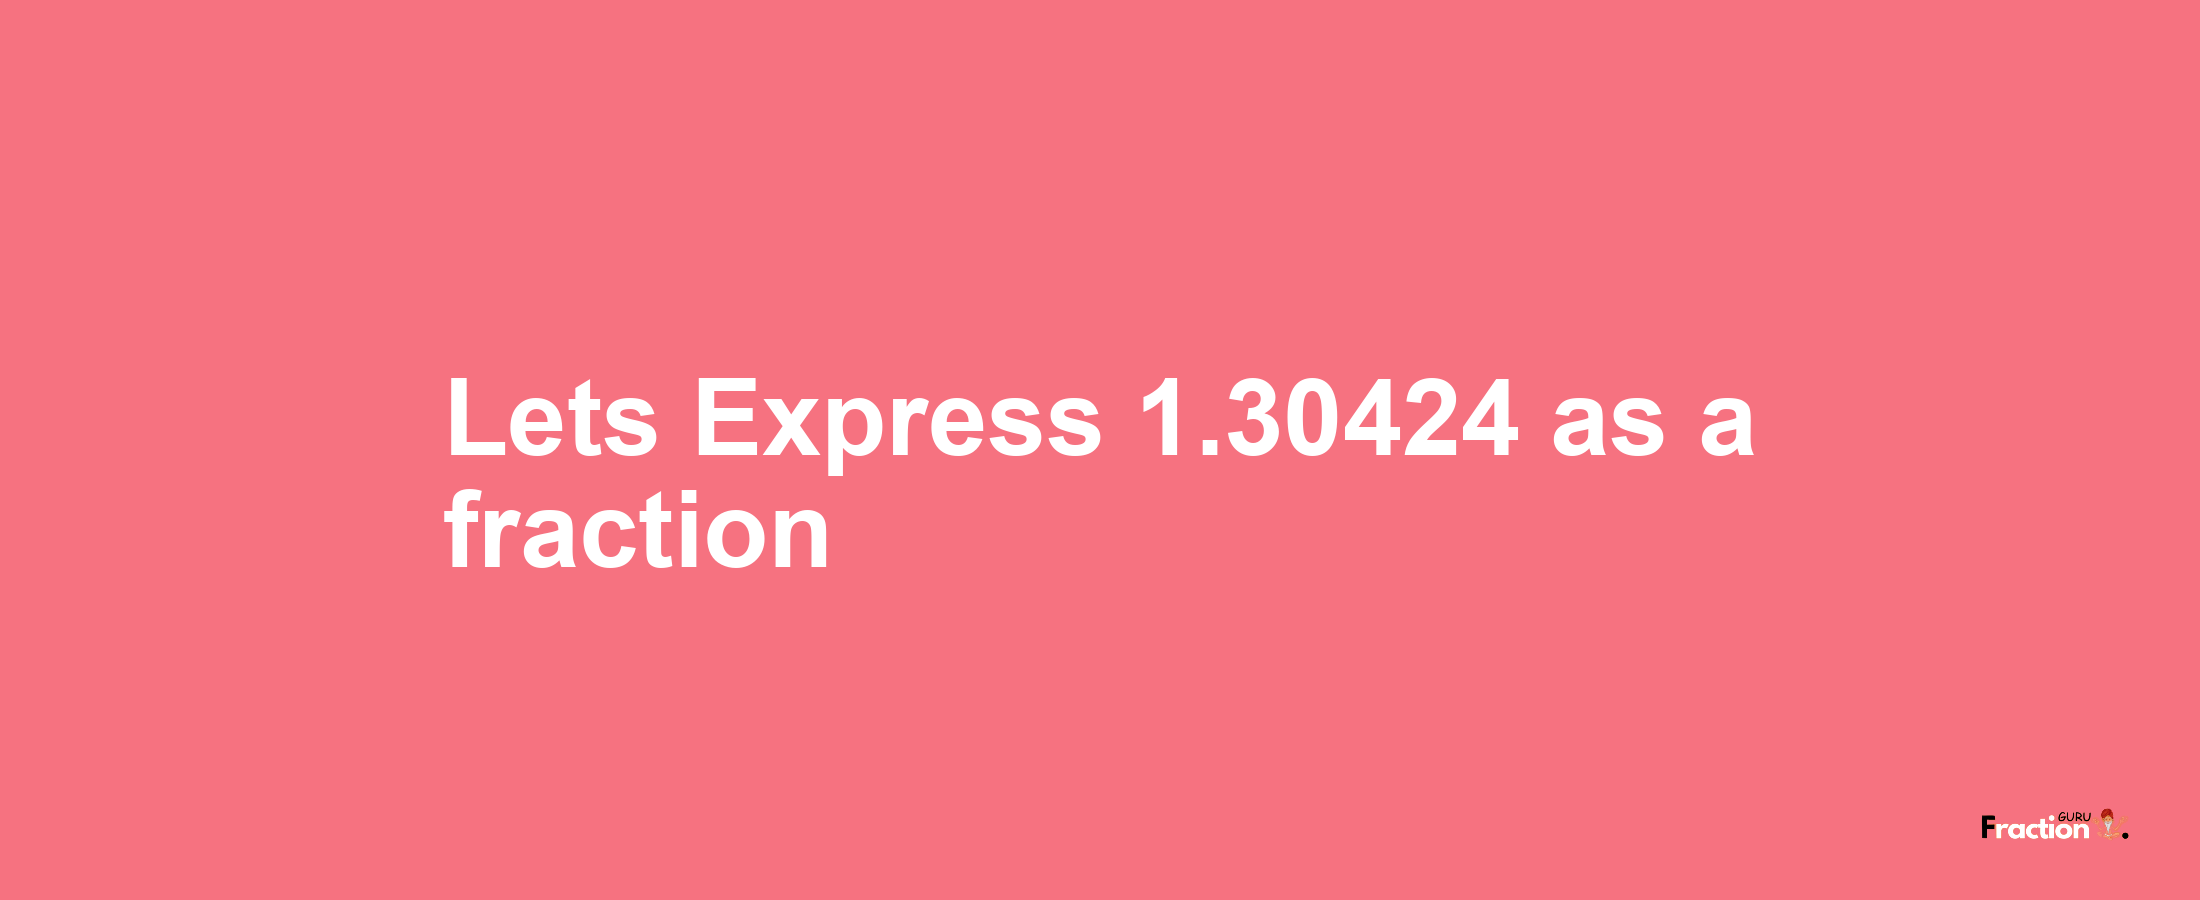 Lets Express 1.30424 as afraction